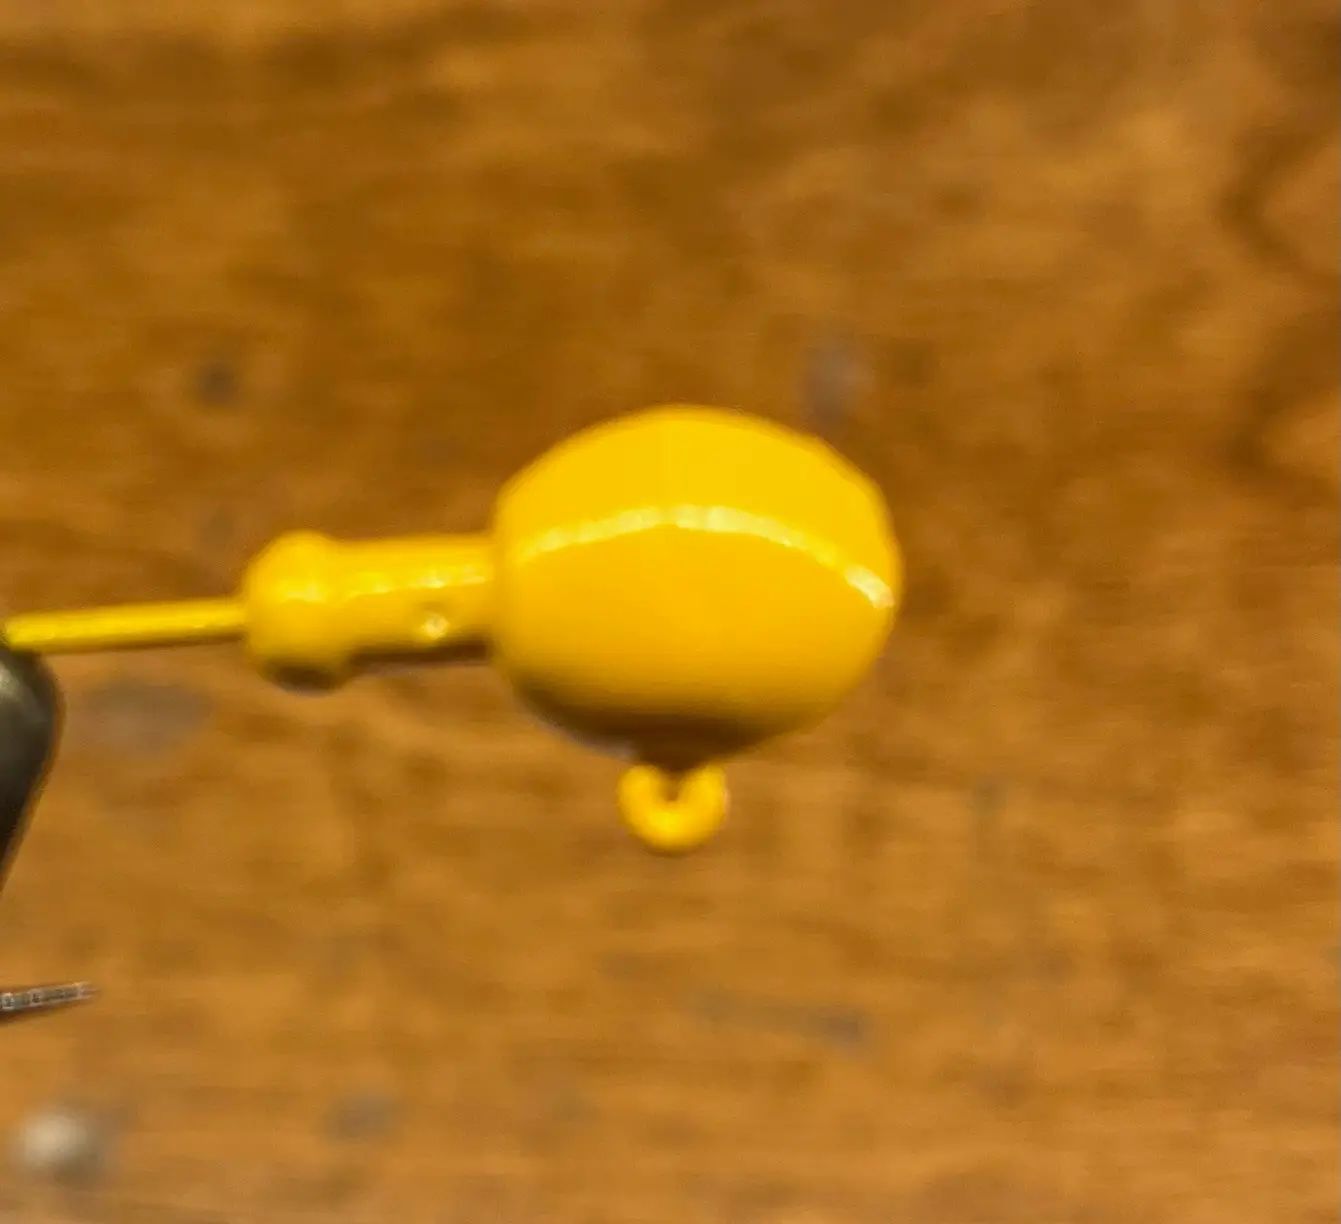 Image of a yellow fishing lure